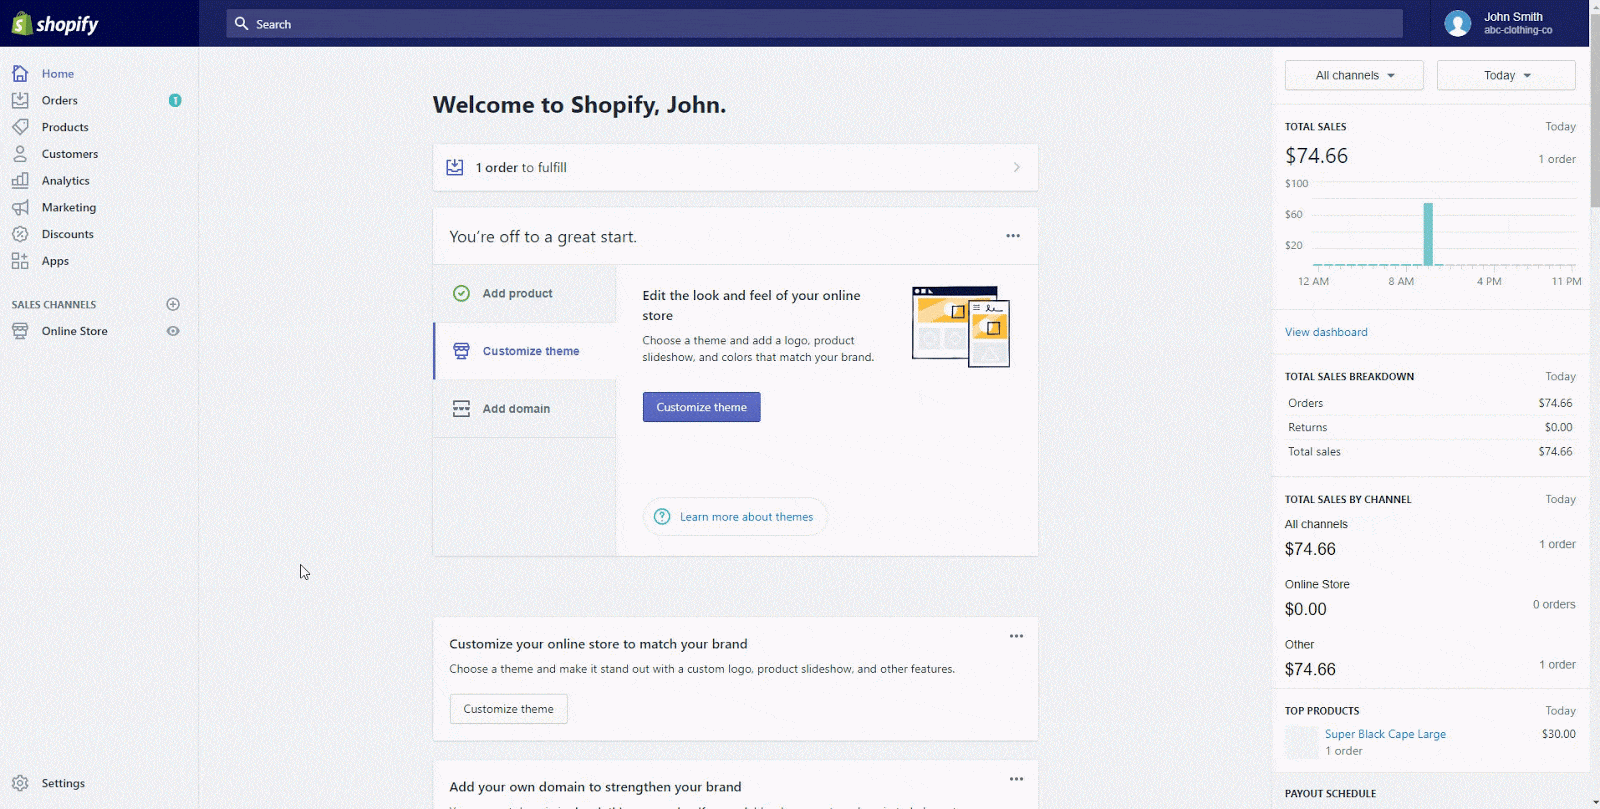 The settings page on Shopify.